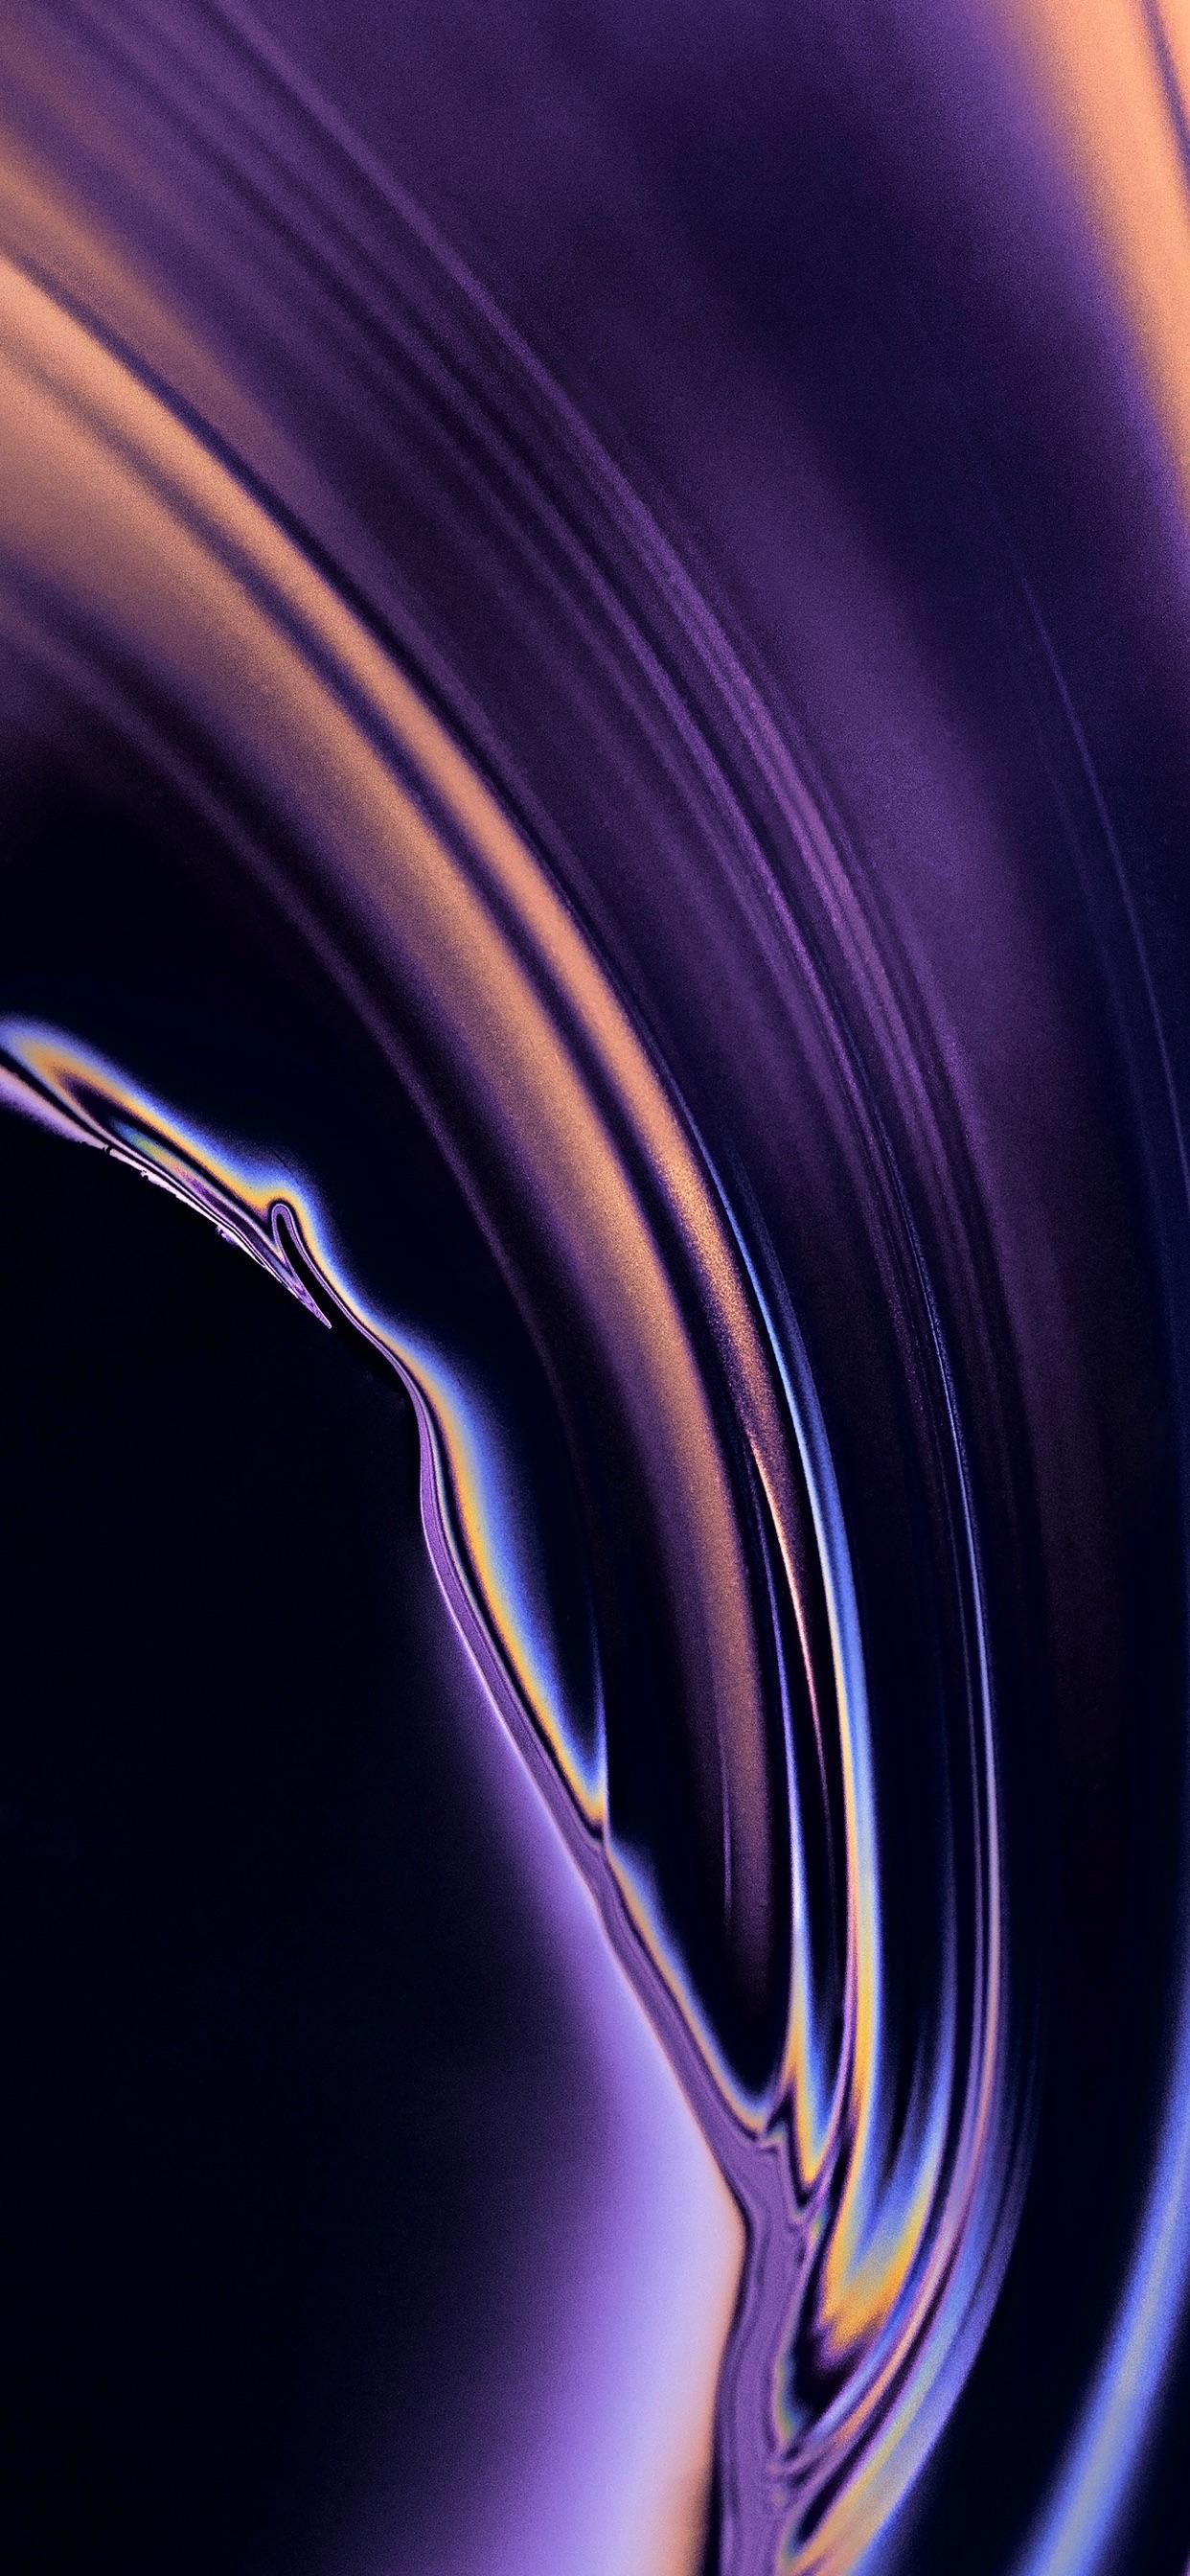 Wallpaper Weekends: Abstract iPhone Wallpaper From